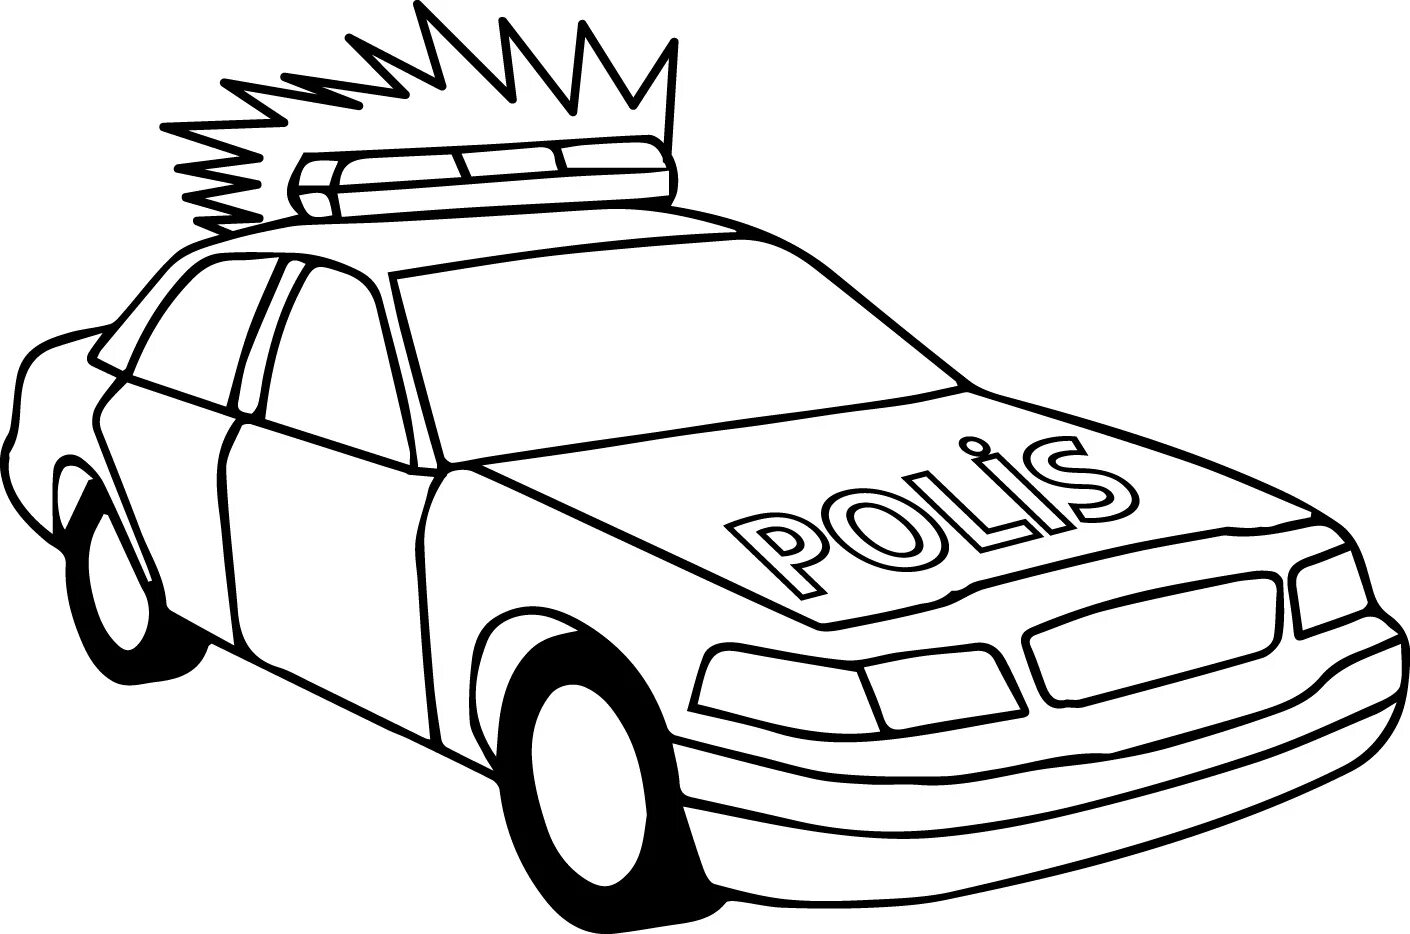 Adorable police car coloring book for 4-5 year olds